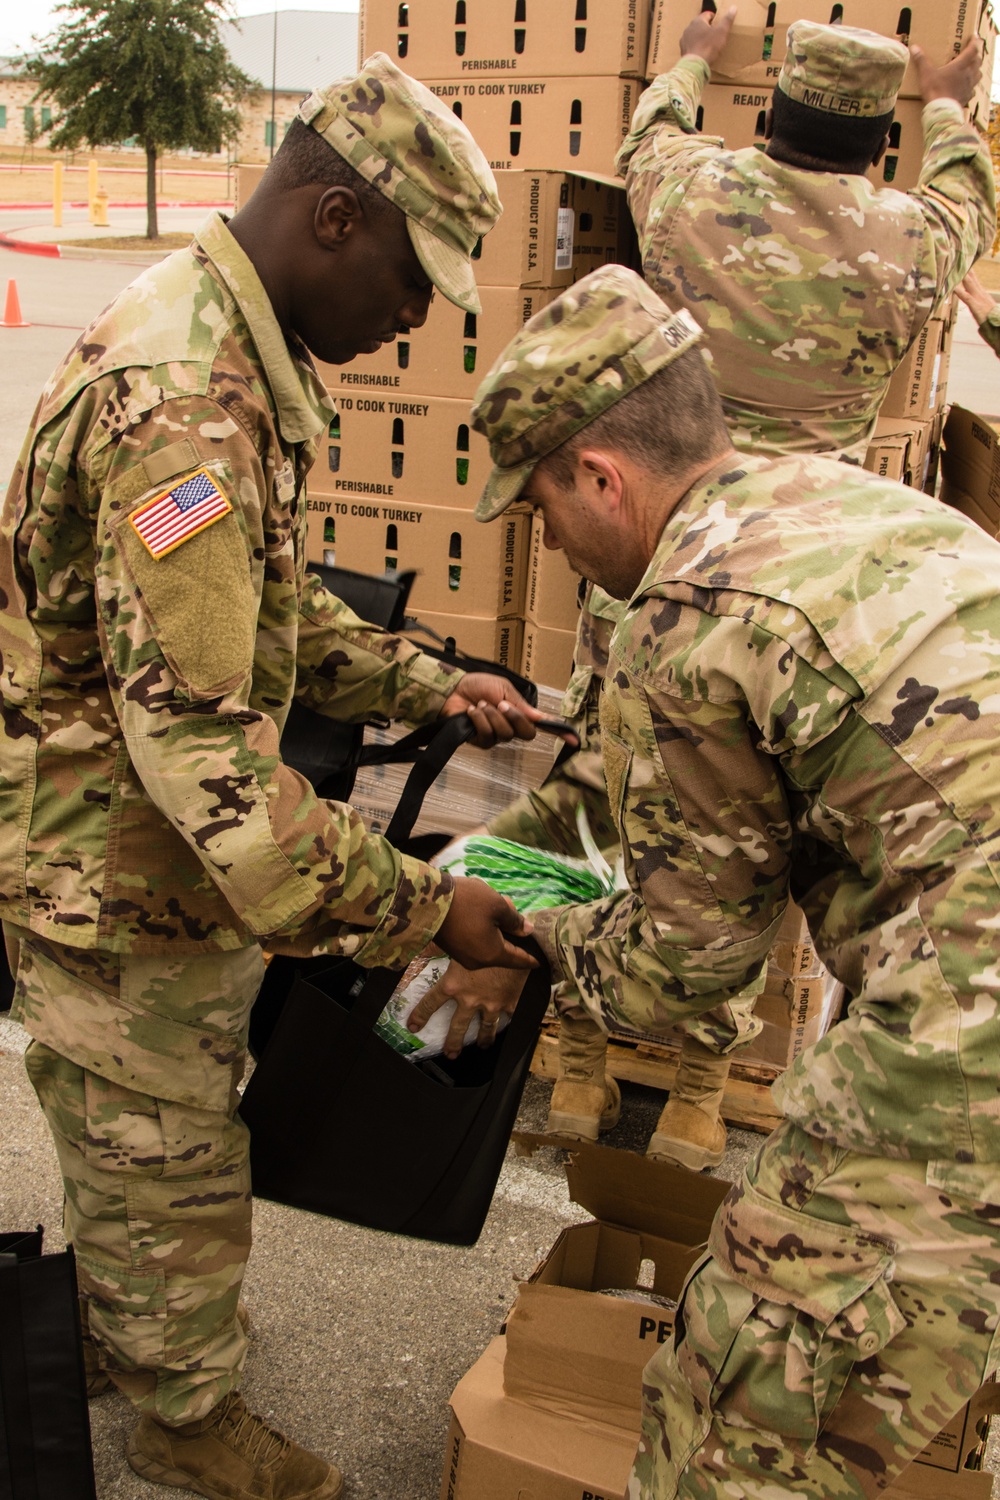 Chaplains and religious affairs specialist from Fort Hood units sort and organize holiday food baskets to be distributed to military families on Nov. 20 at Fort Hood’s Main Post Chapel.